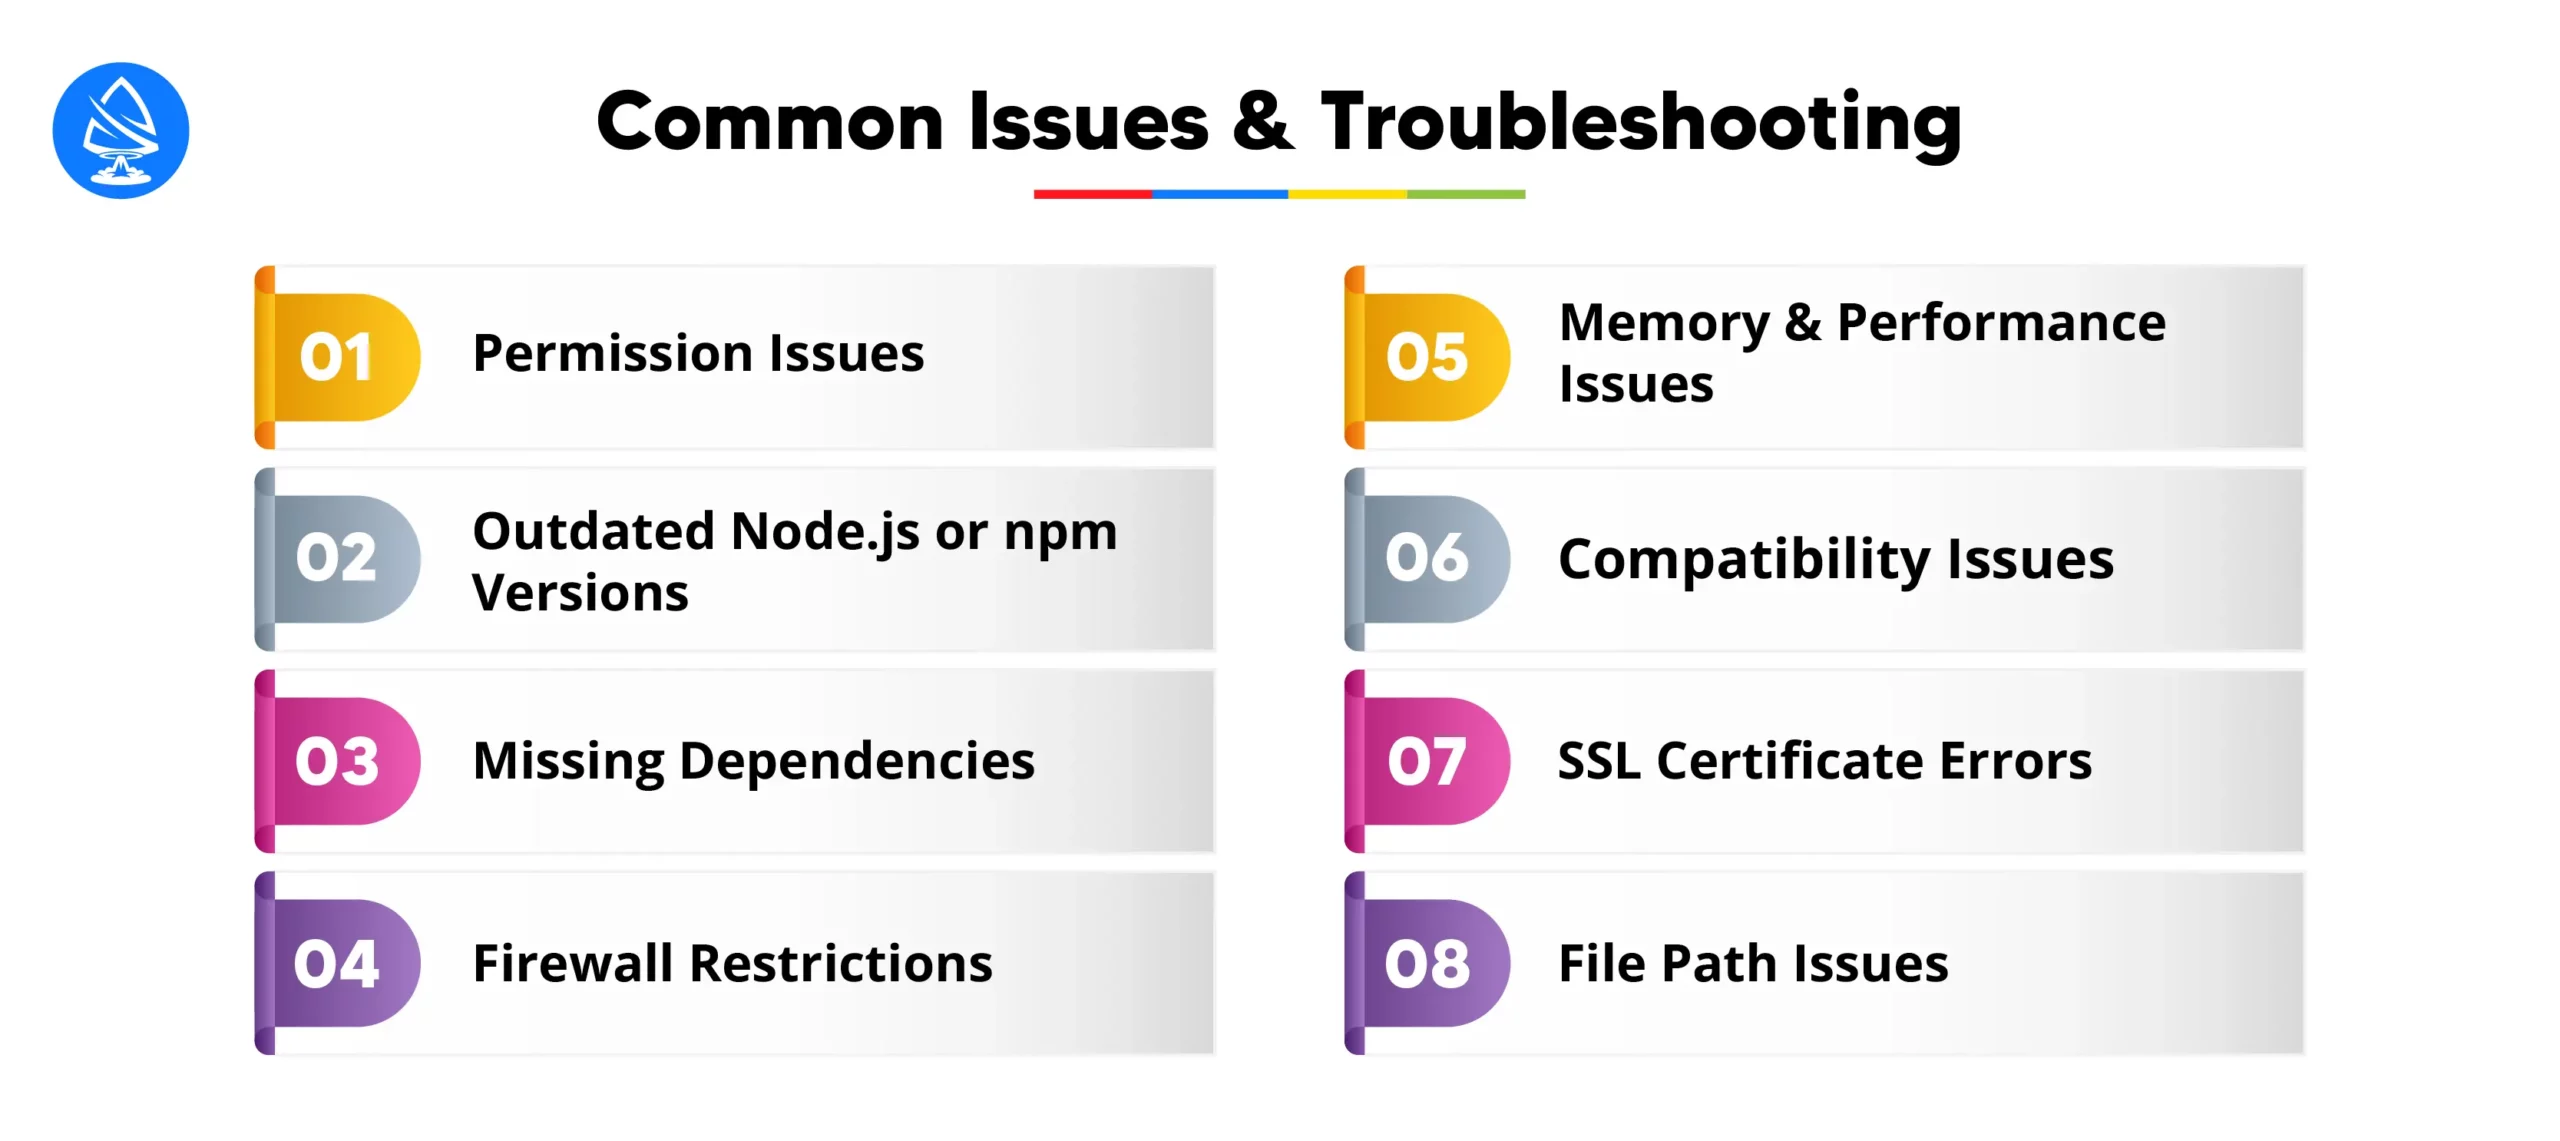 Common Issues and Troubleshooting 